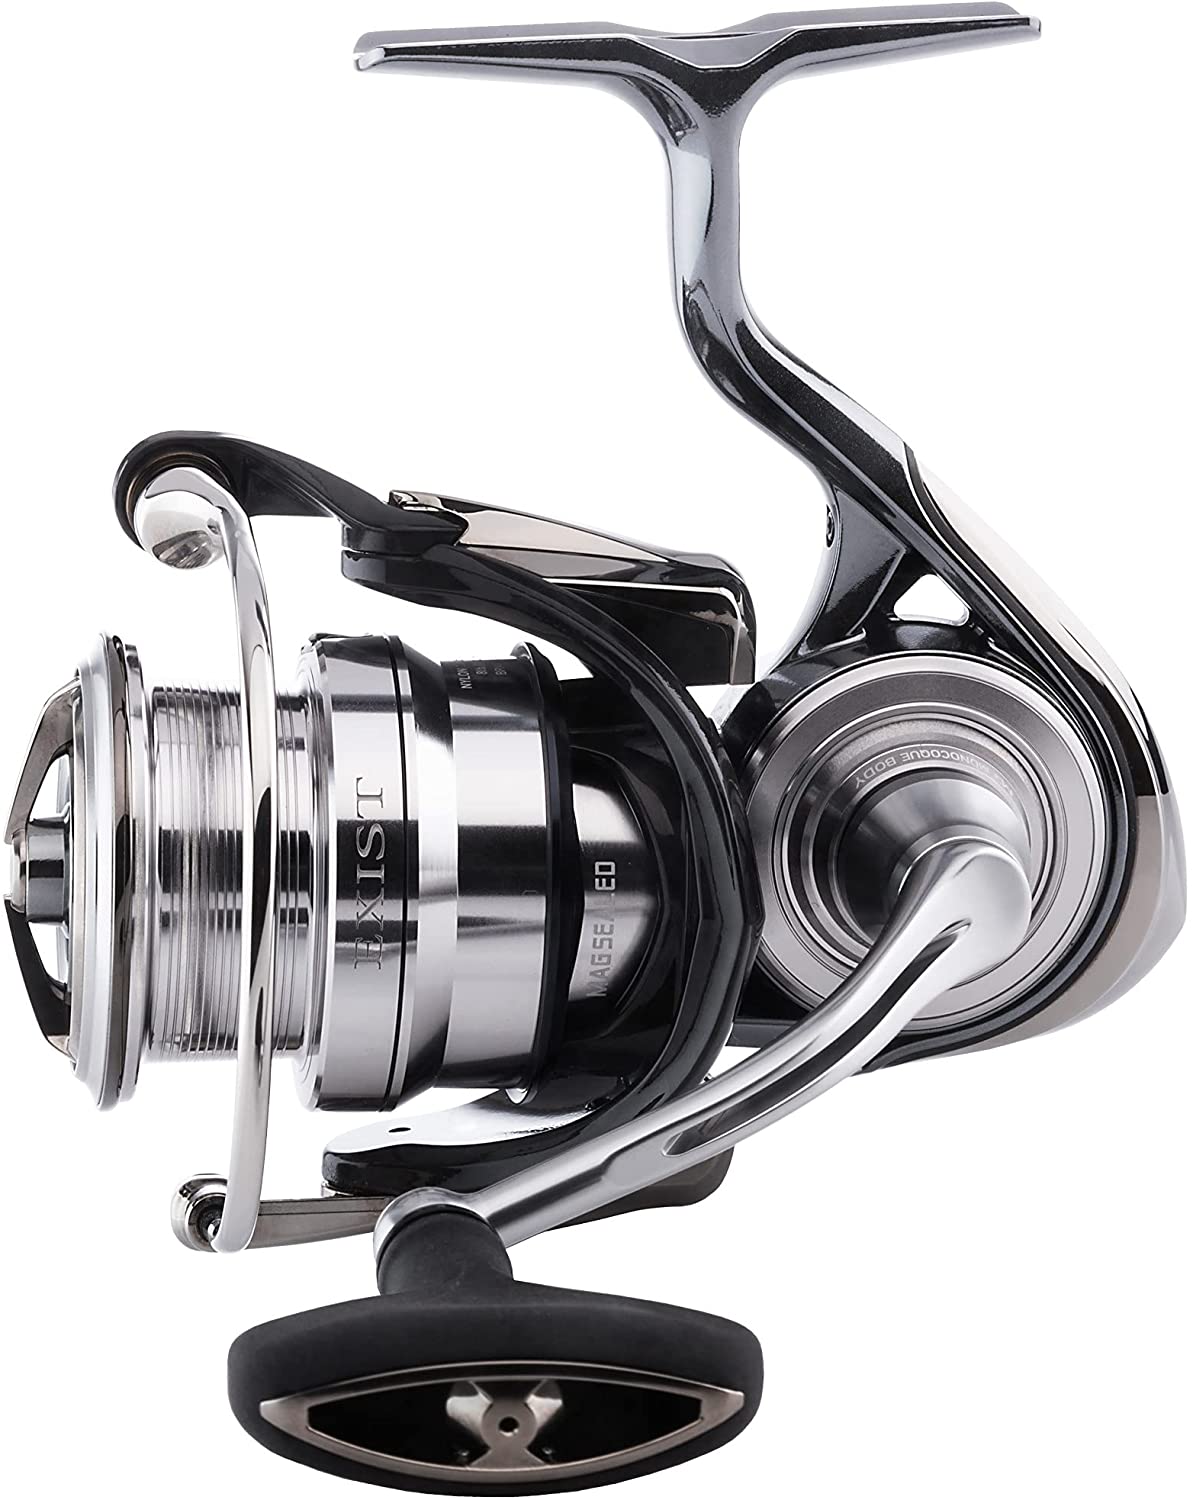 Daiwa Exist G LT 1000 Spinning Reel existglt1000d-p - Discovery Japan Mall